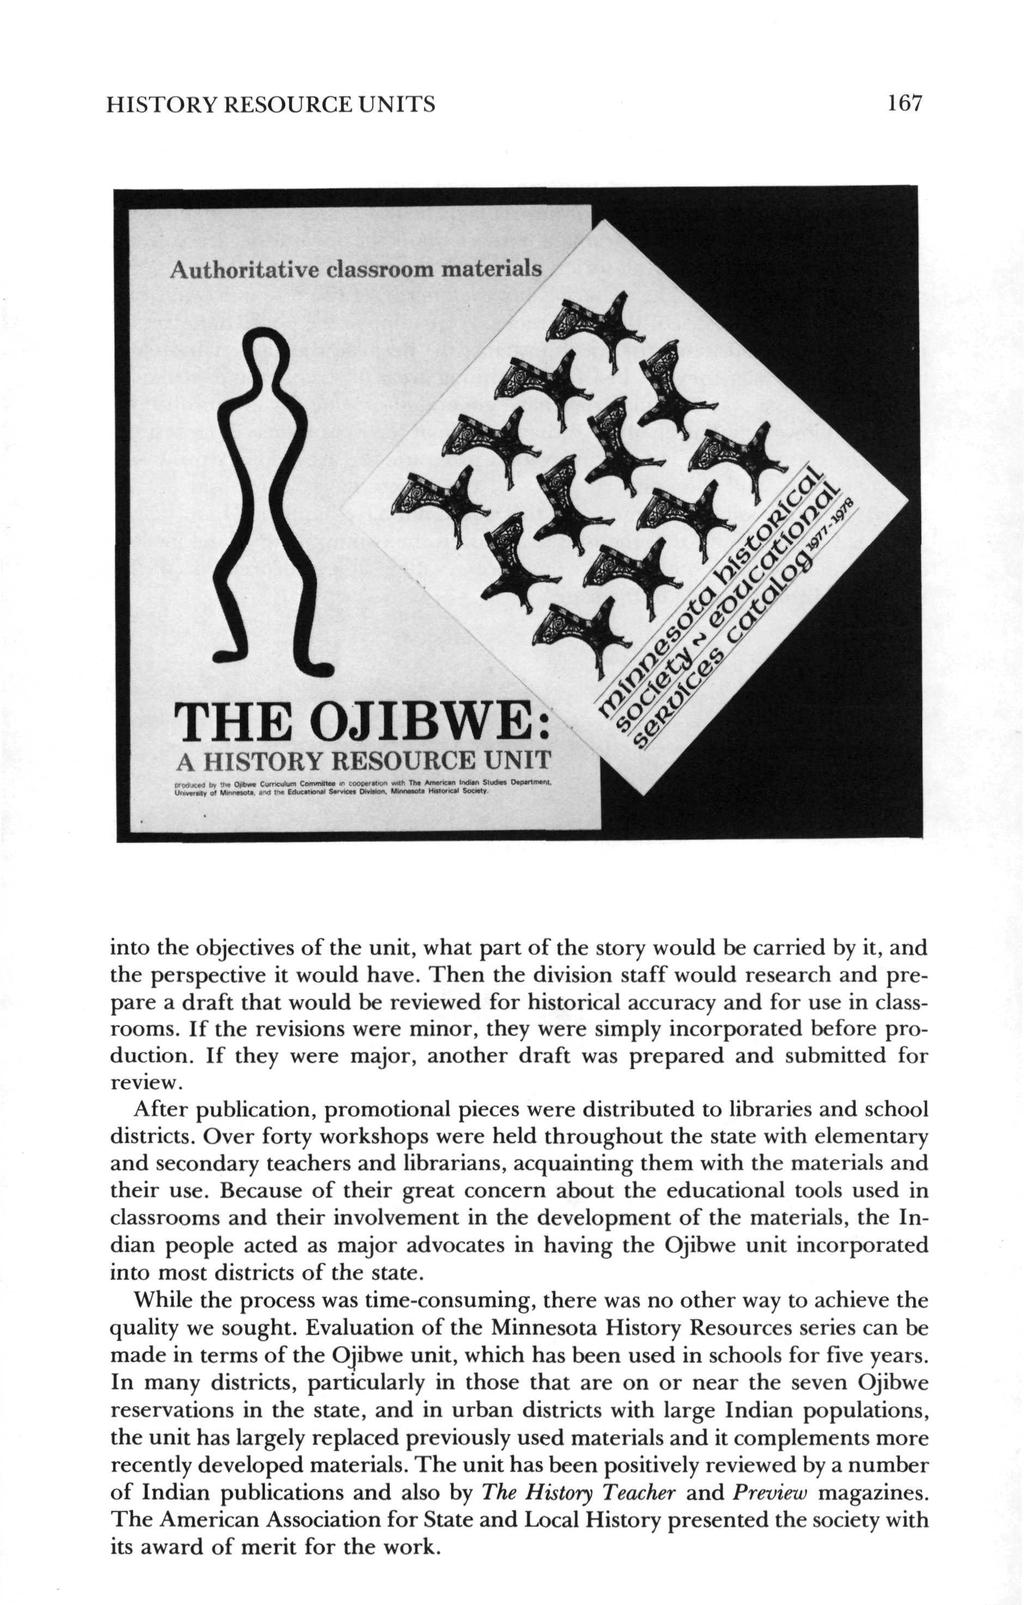 HISTORY RESOURCE UNITS 167 Authoritative classroom materials THE OJIBWE: A HISTORY RESOURCE UNIT into the objectives of the unit, what part of the story would be carried by it, and the perspective it